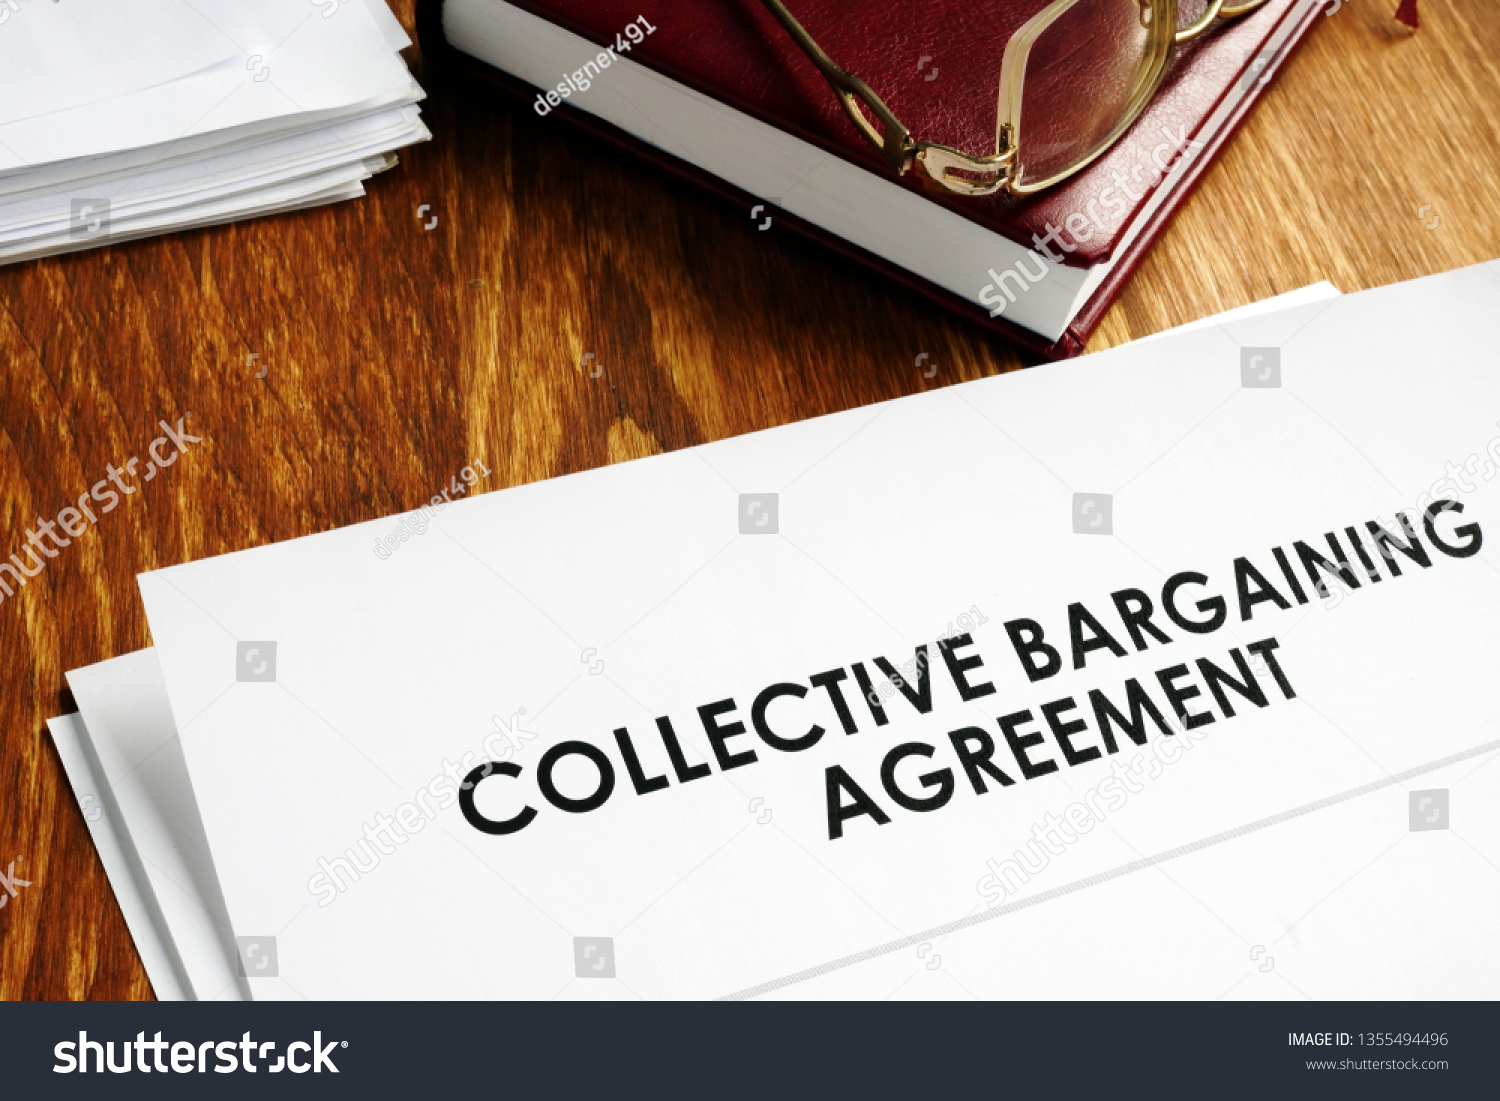 Collective bargaining agreement and note pad with glasses. #1355494496